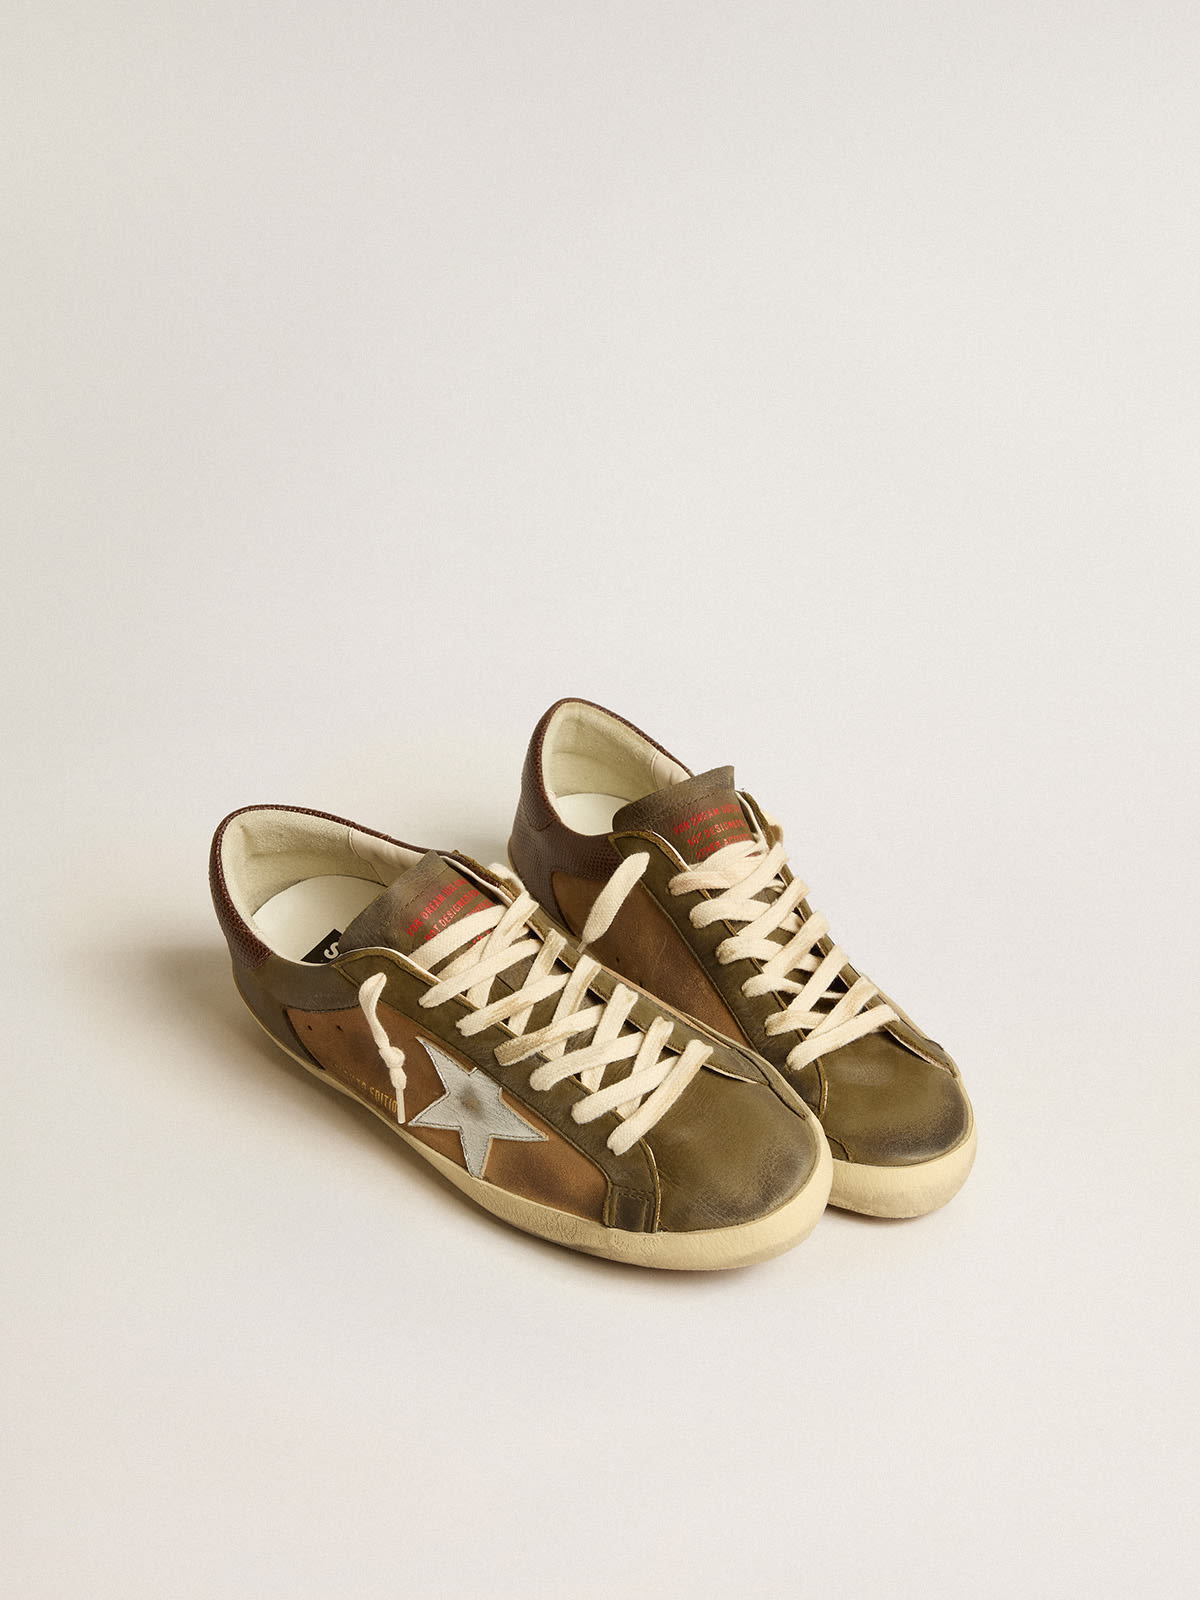 Golden Goose - Super-Star LTD in green leather and tobacco-colored suede with silver star in 